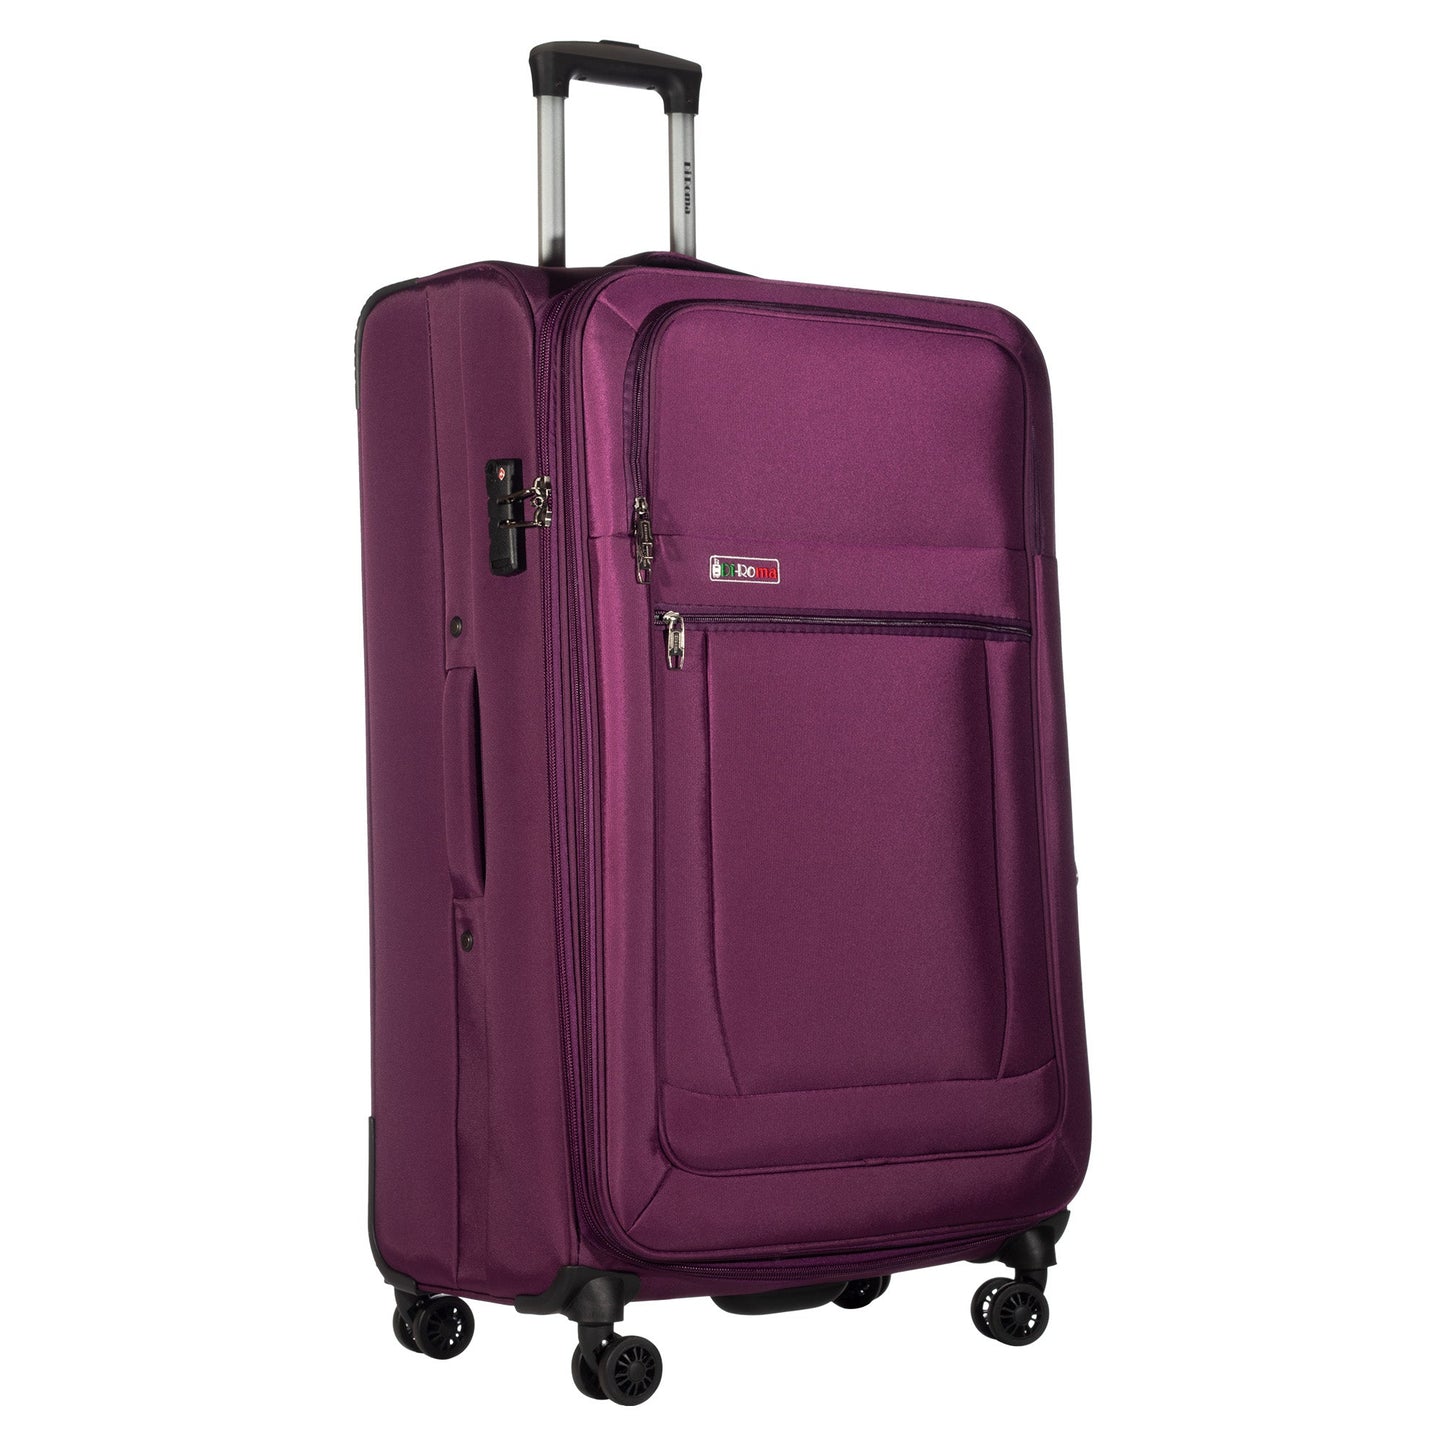 Luca Collection Purple luggage (20/26/30") Suitcase